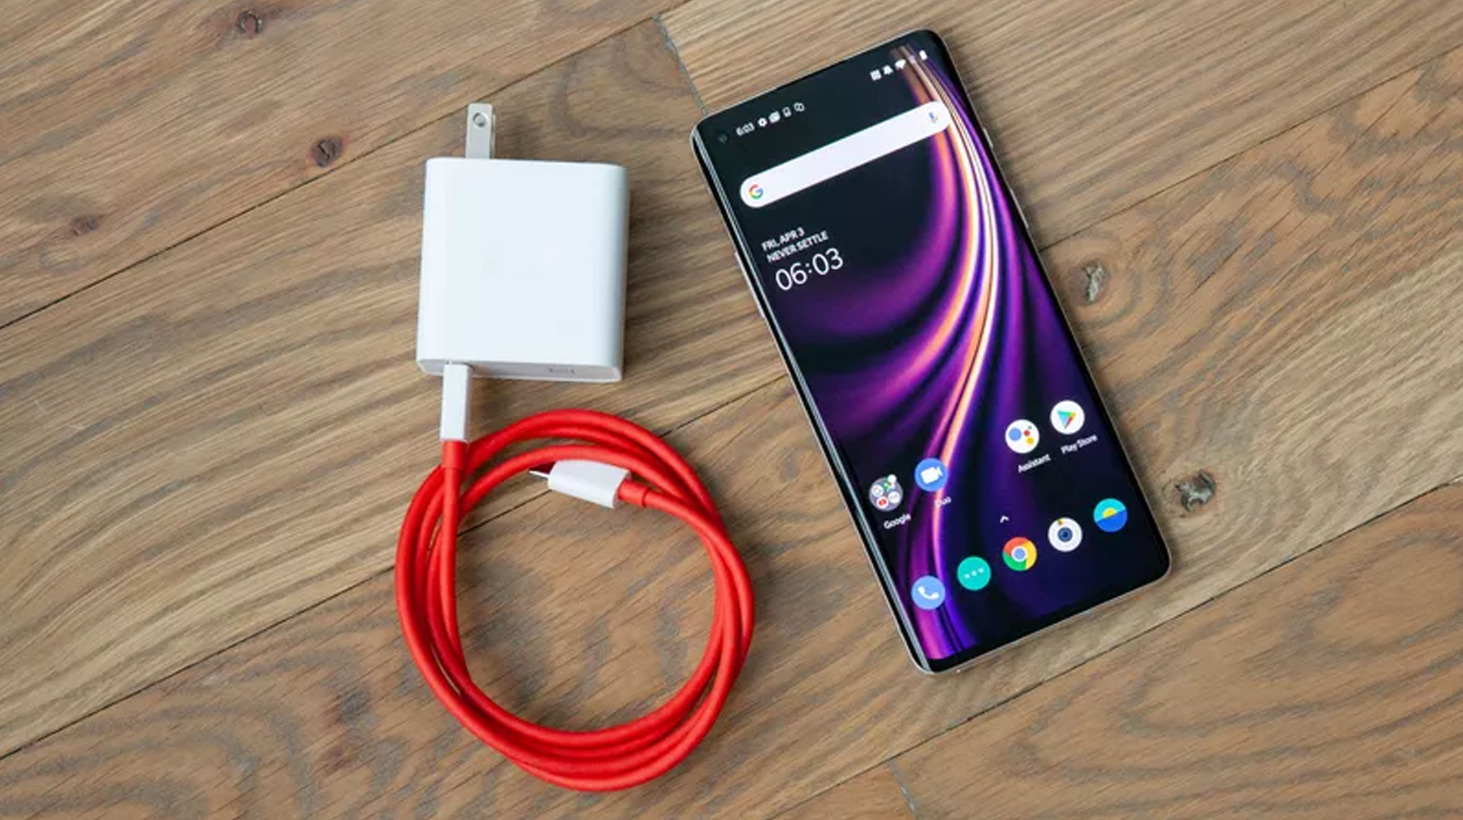 OnePlus 8 with charger (Image: © Future)